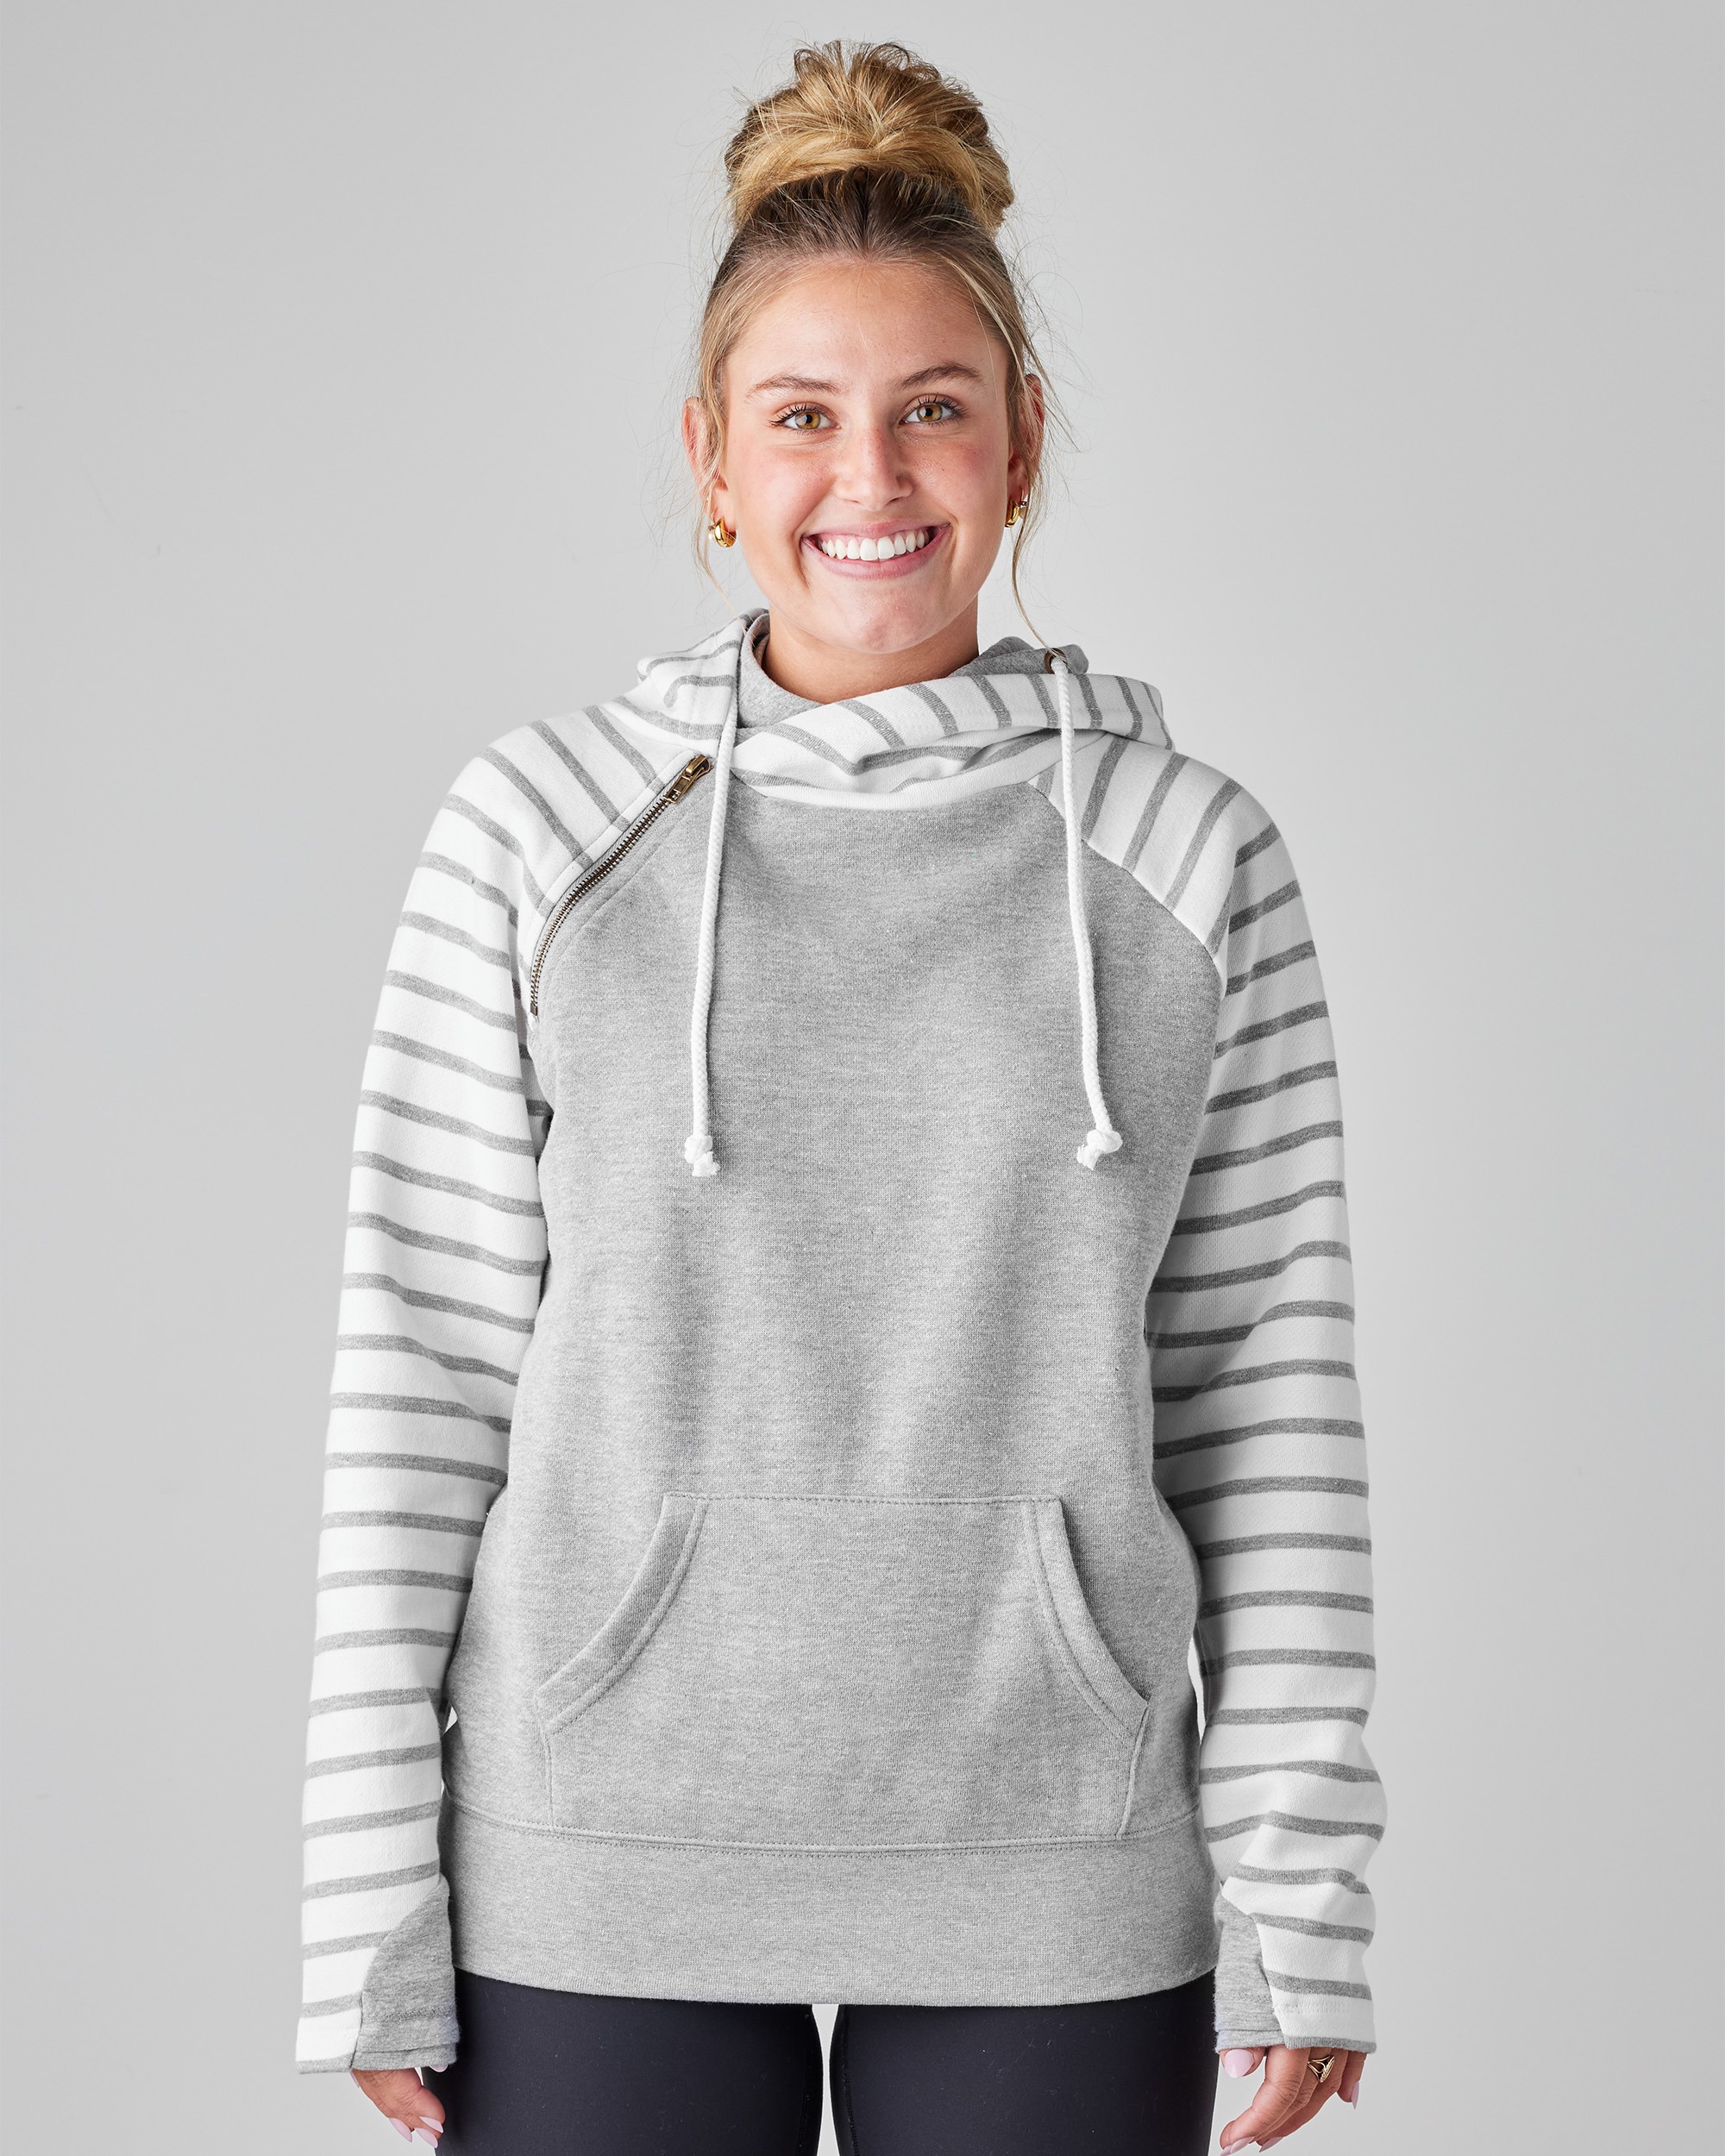 Enza® 38379 Ladies Stripe Double Hood Pullover, shown in Athletic Heather/Athletic Heather/White Stripe